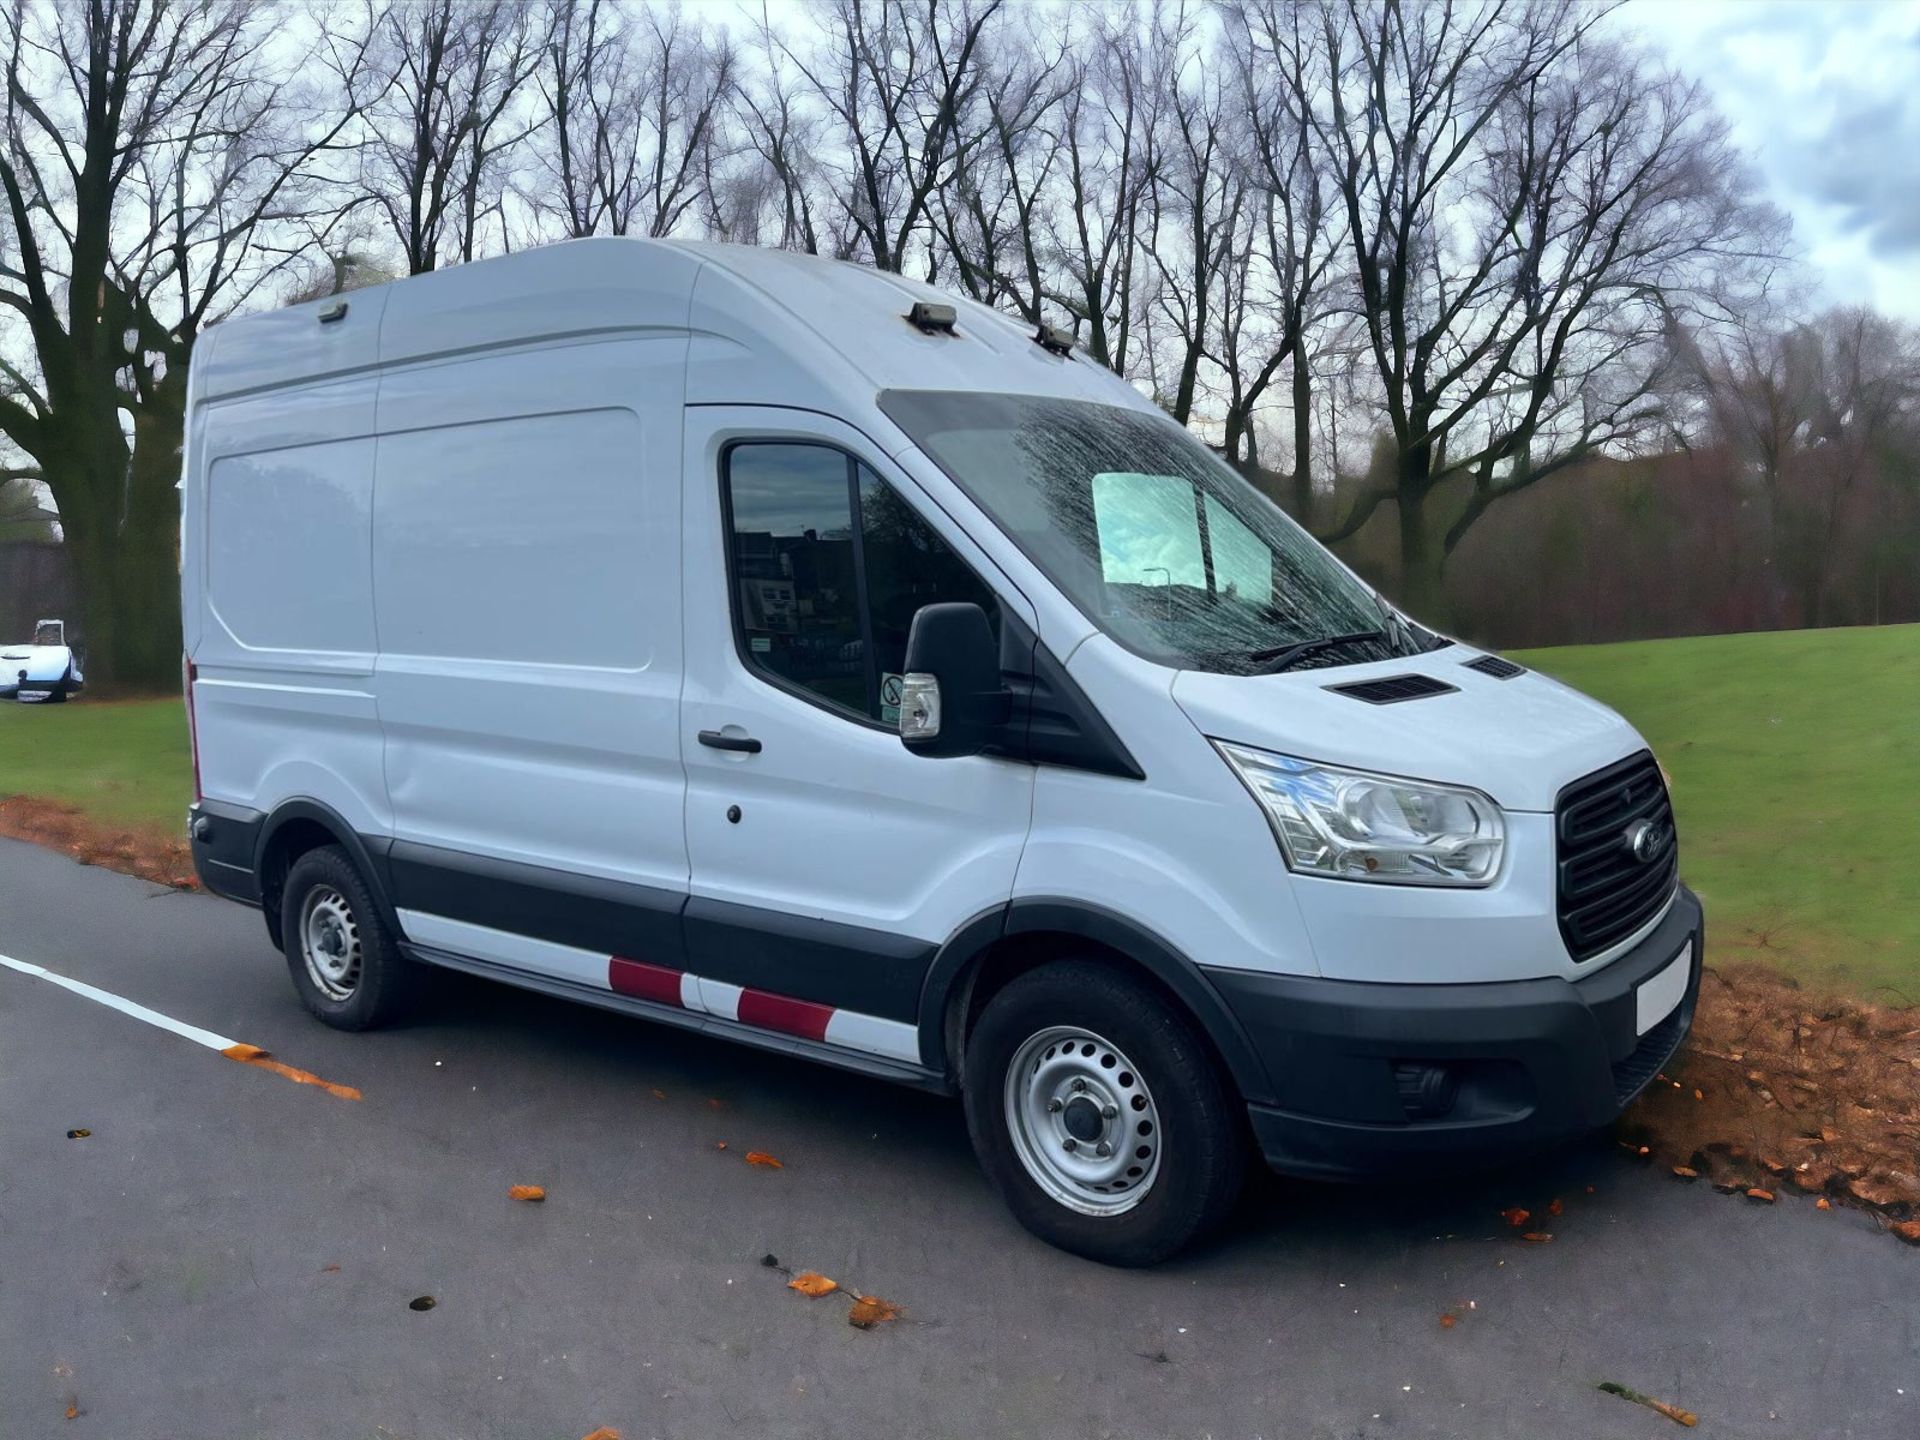 2015 FORD TRANSIT T350 MWB L2H3 PANEL VAN - FULLY EQUIPPED FOR YOUR BUSINESS NEEDS